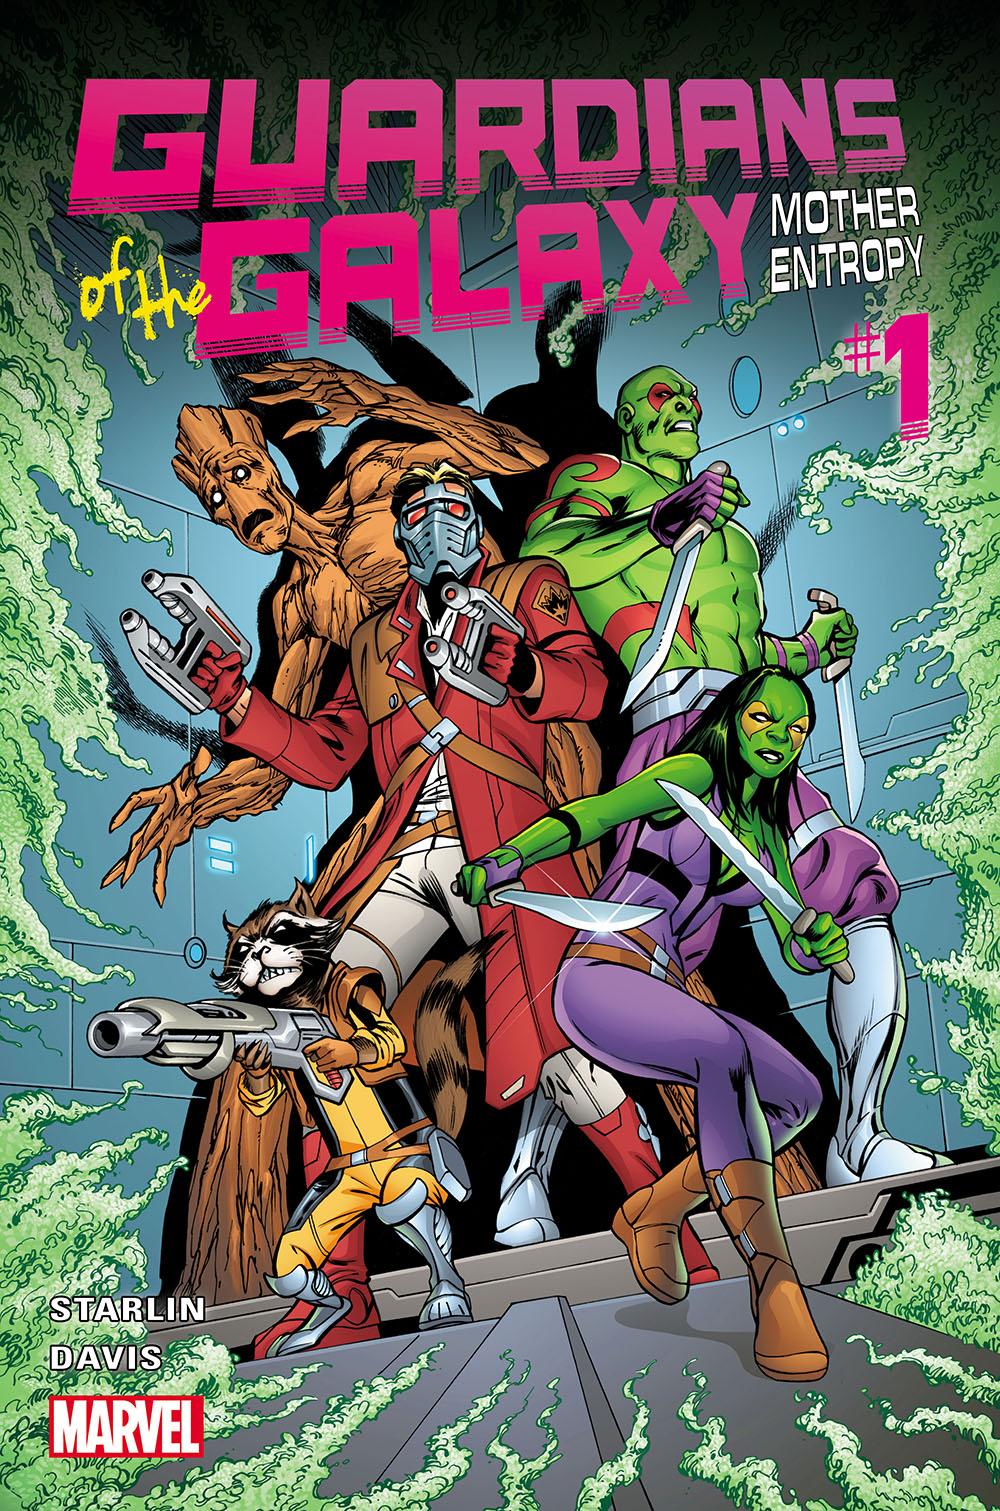 Guardians of the Galaxy: Mother Entropy Vol. 1 #1